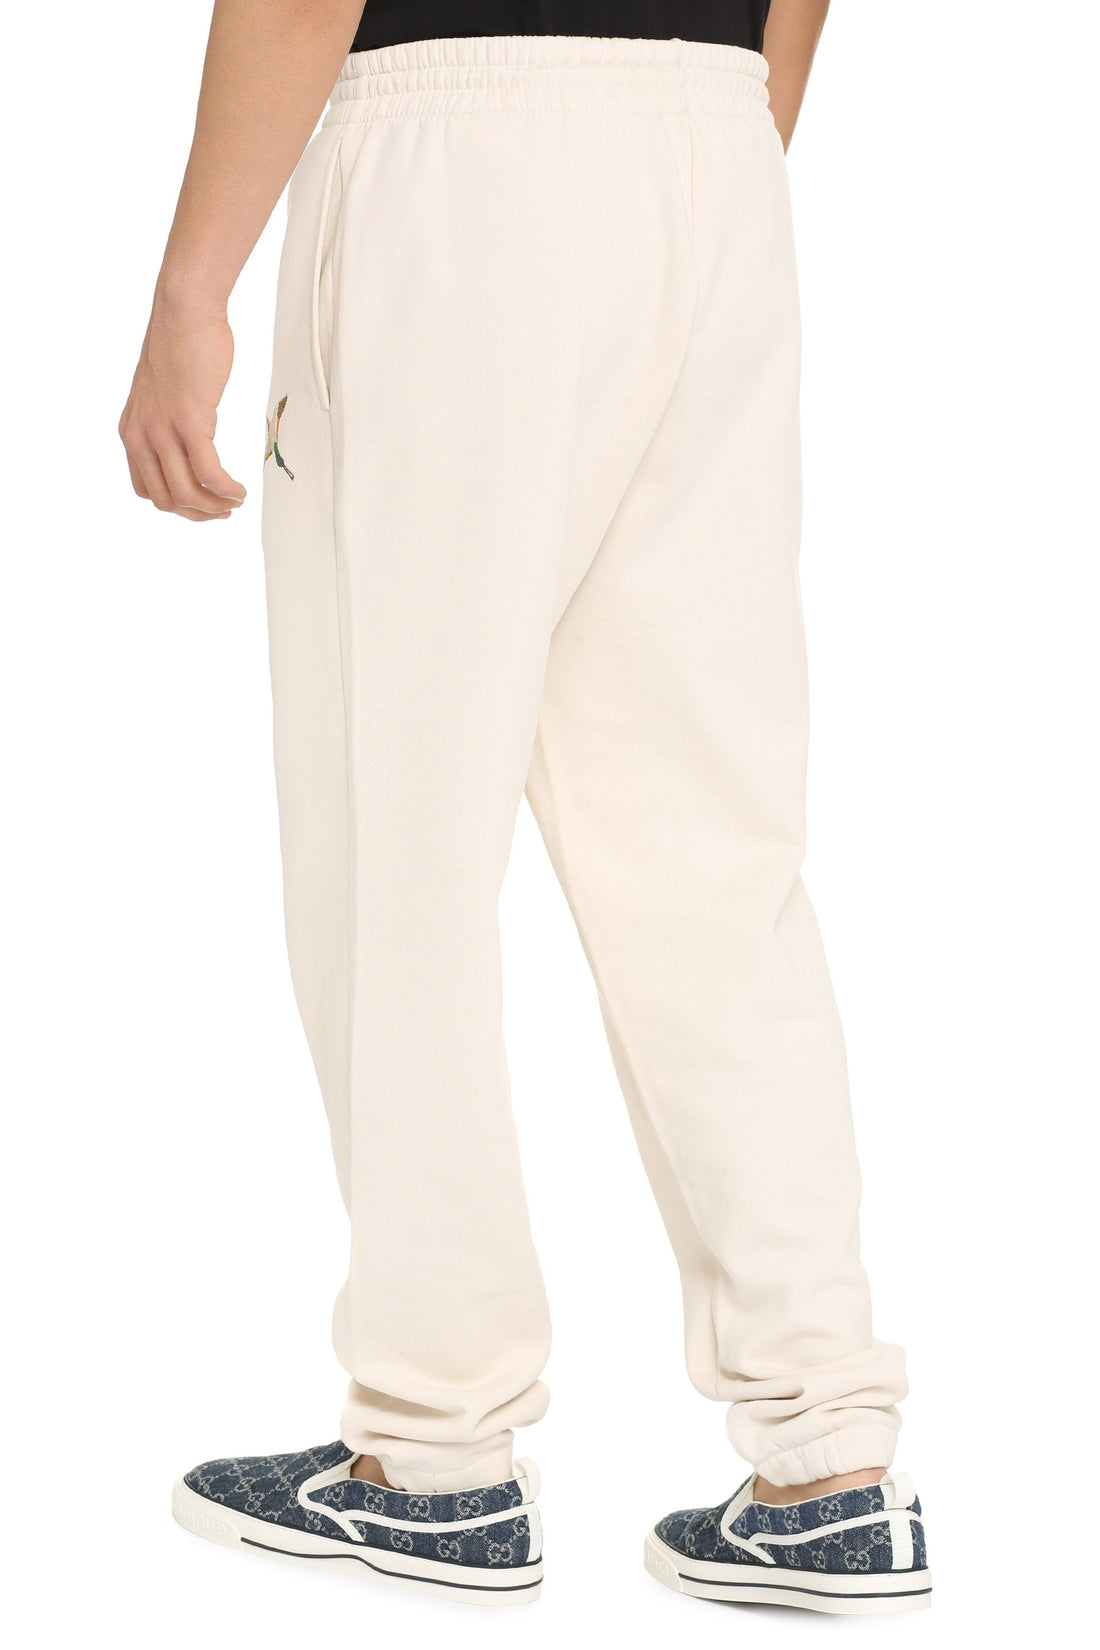 Axel Arigato-OUTLET-SALE-Single Bee Bird stretch cotton track-pants-ARCHIVIST